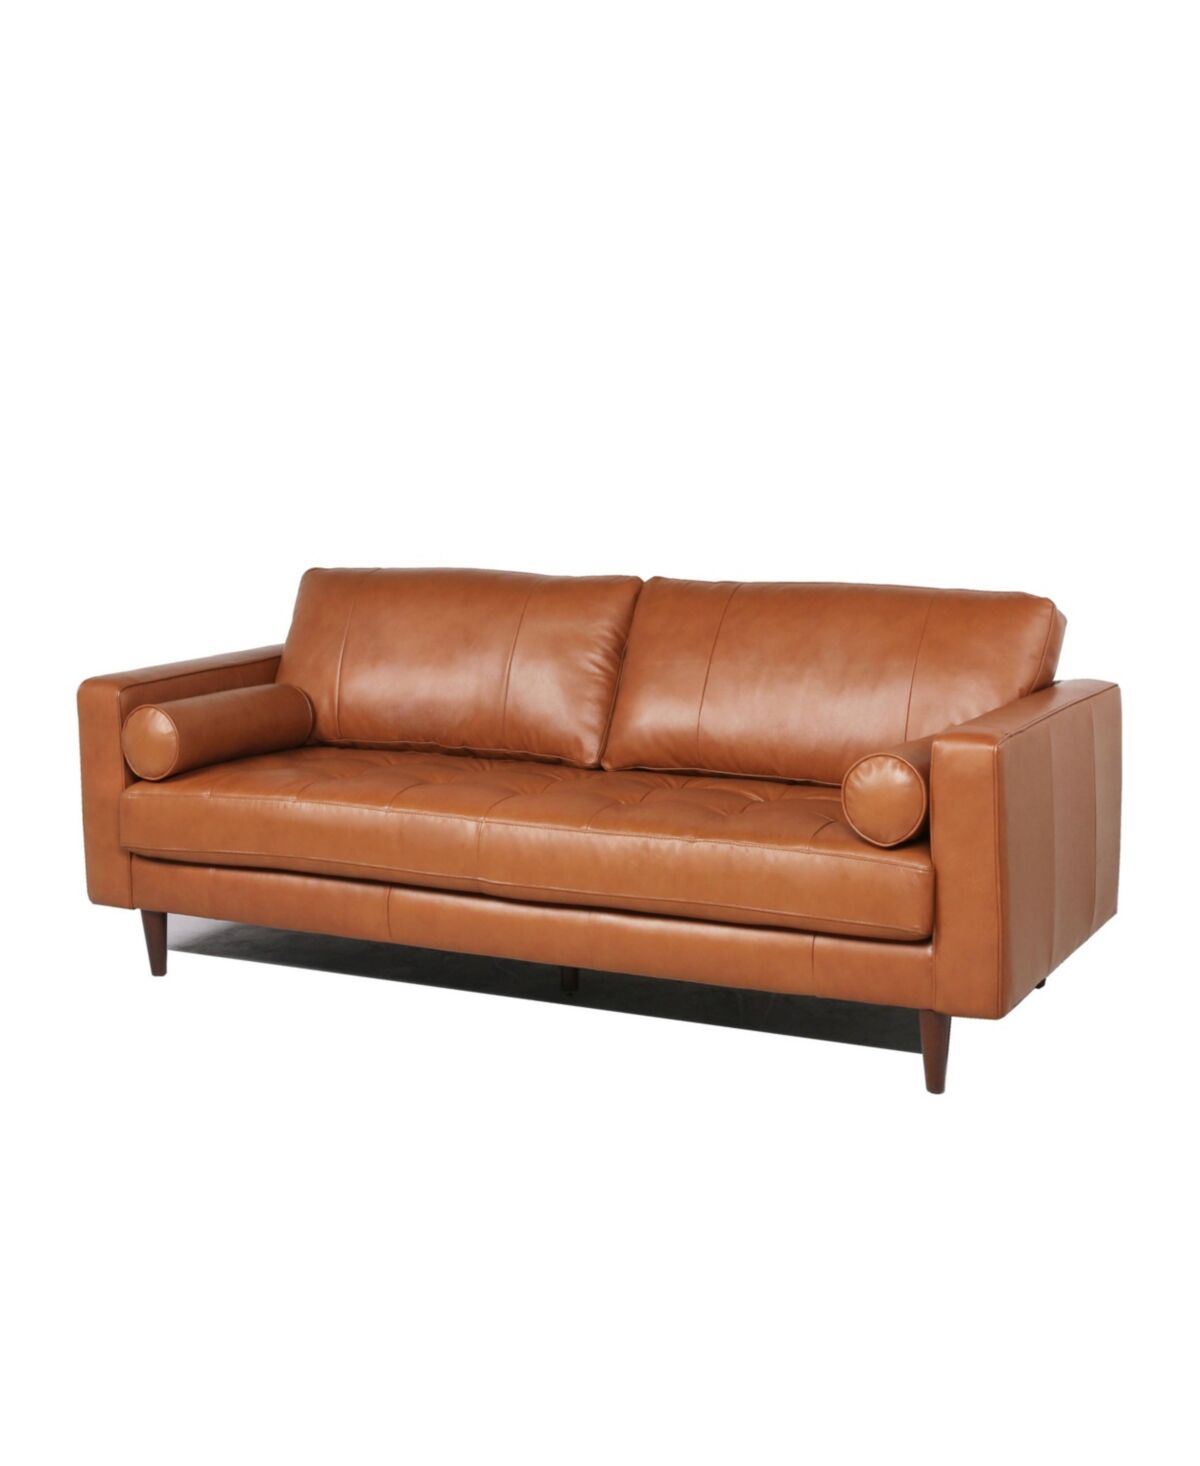 Nice Link Maebelle Leather Sofa with Tufted Seat And Back - Camel